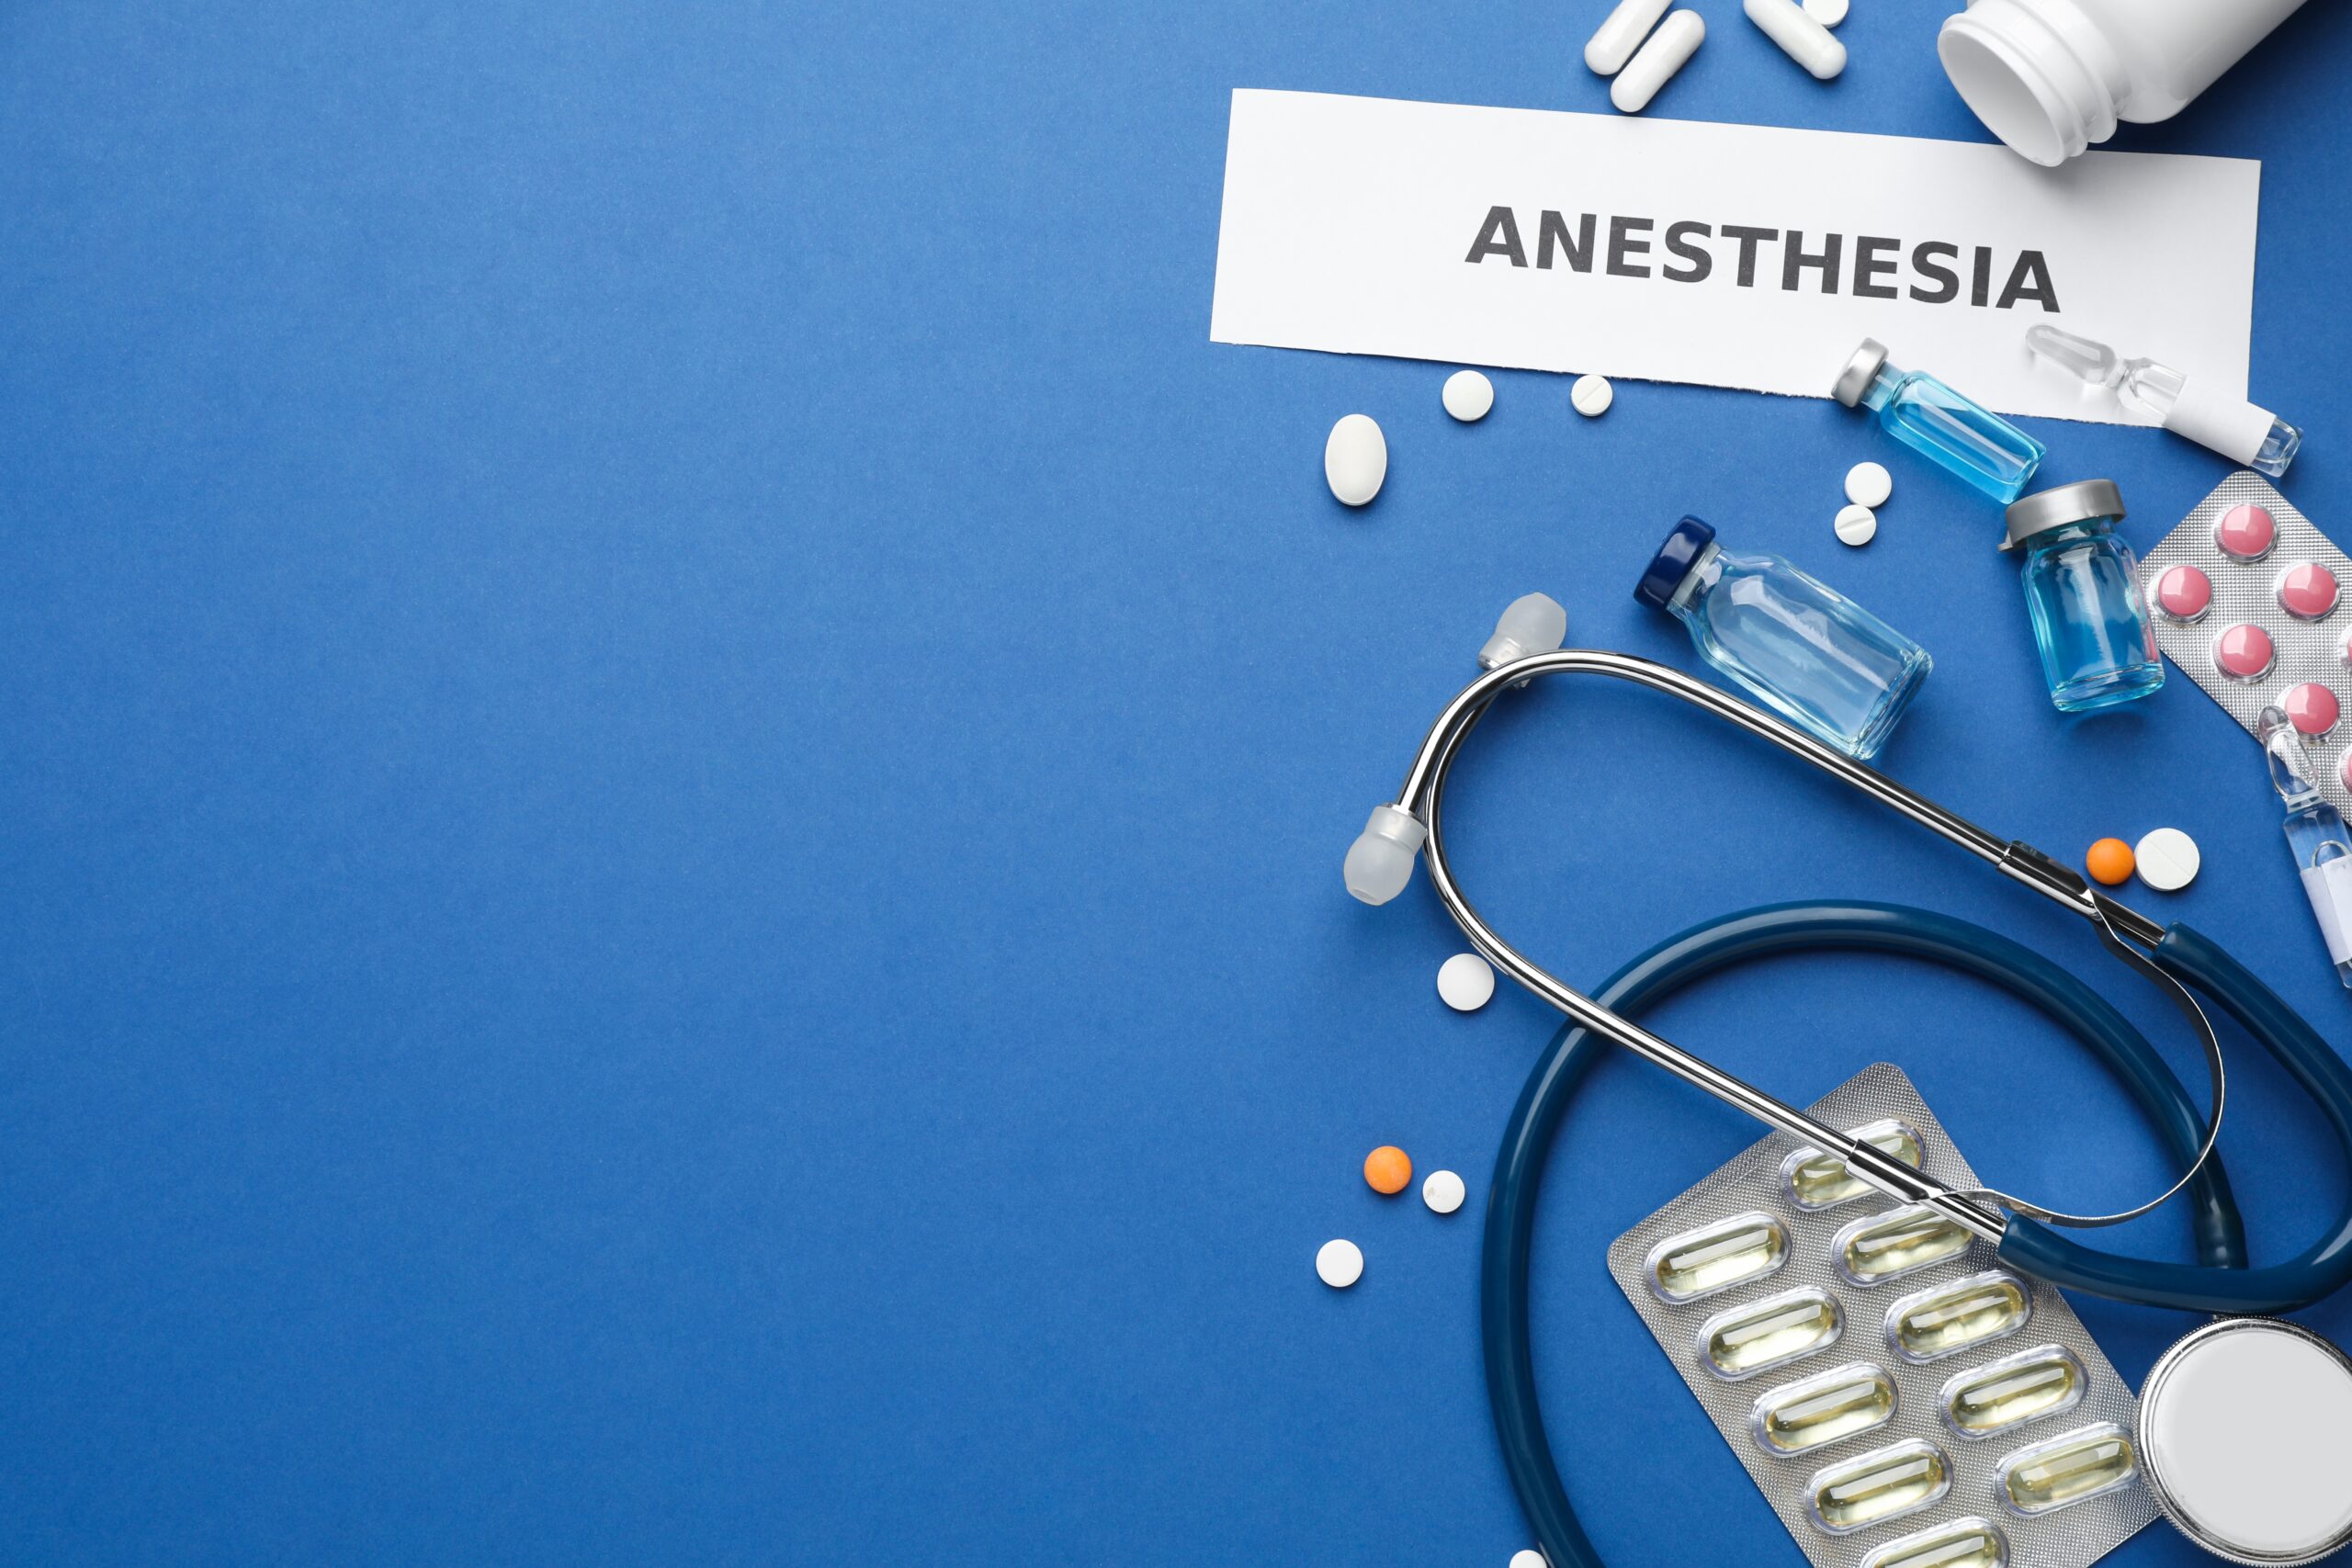 What Anesthesia Methods Used in Oral Surgery?